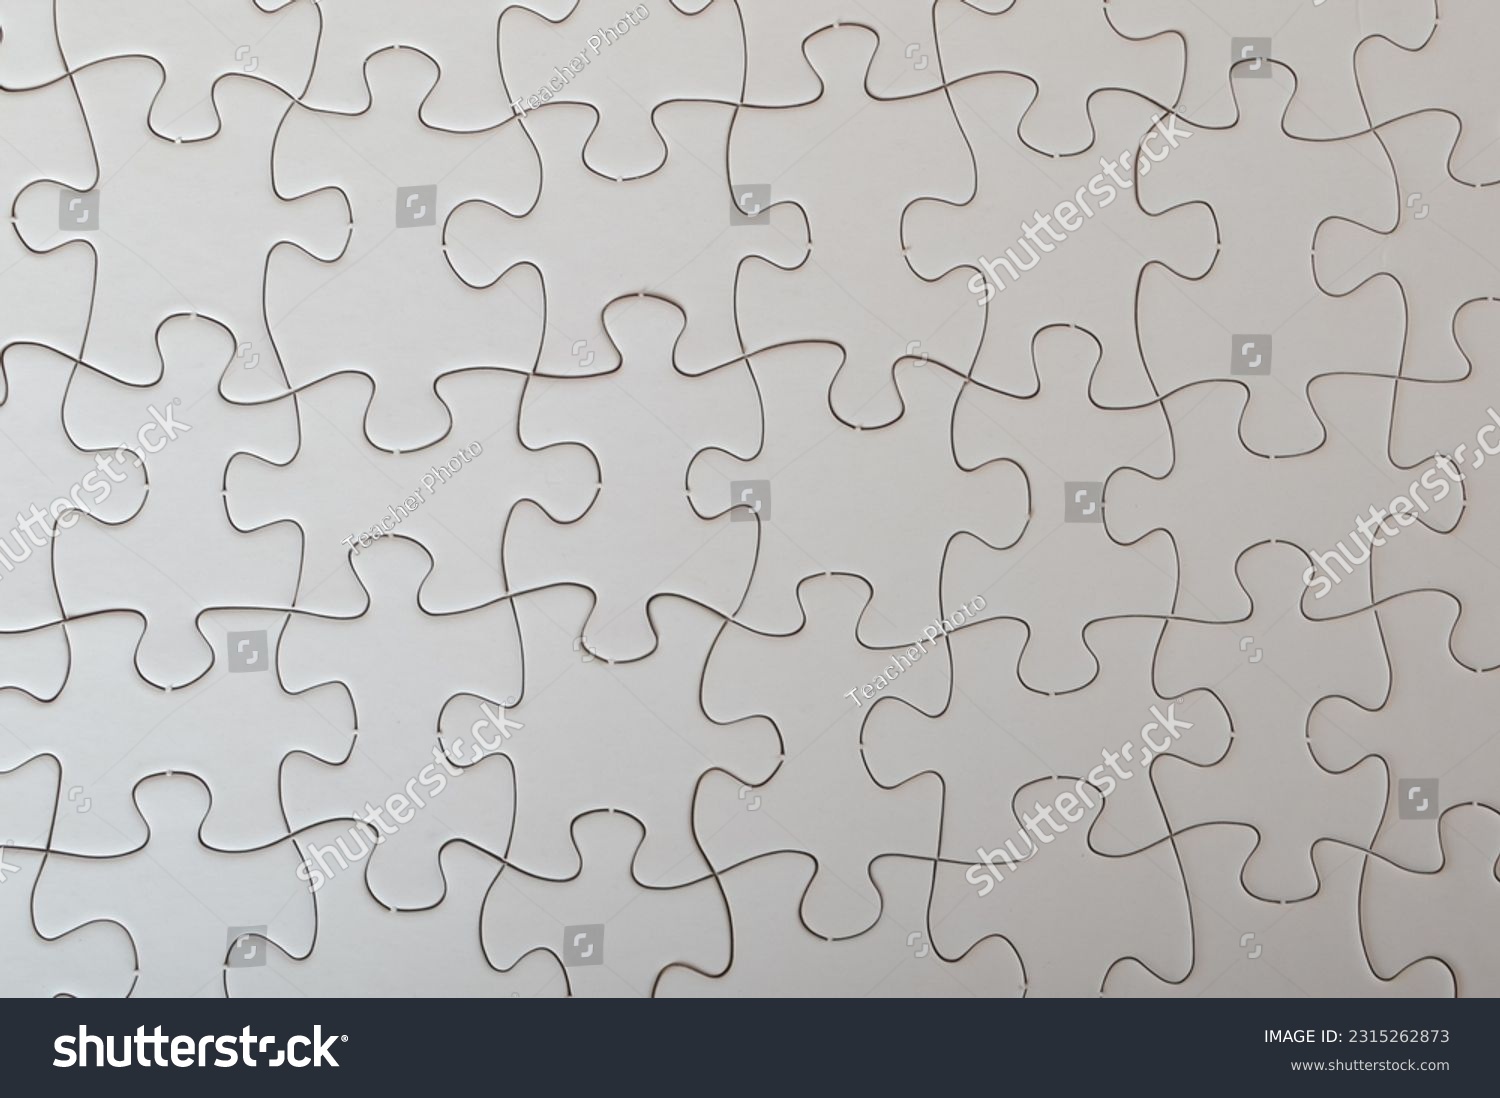 Puzzle pieces isolated on a white background. #2315262873